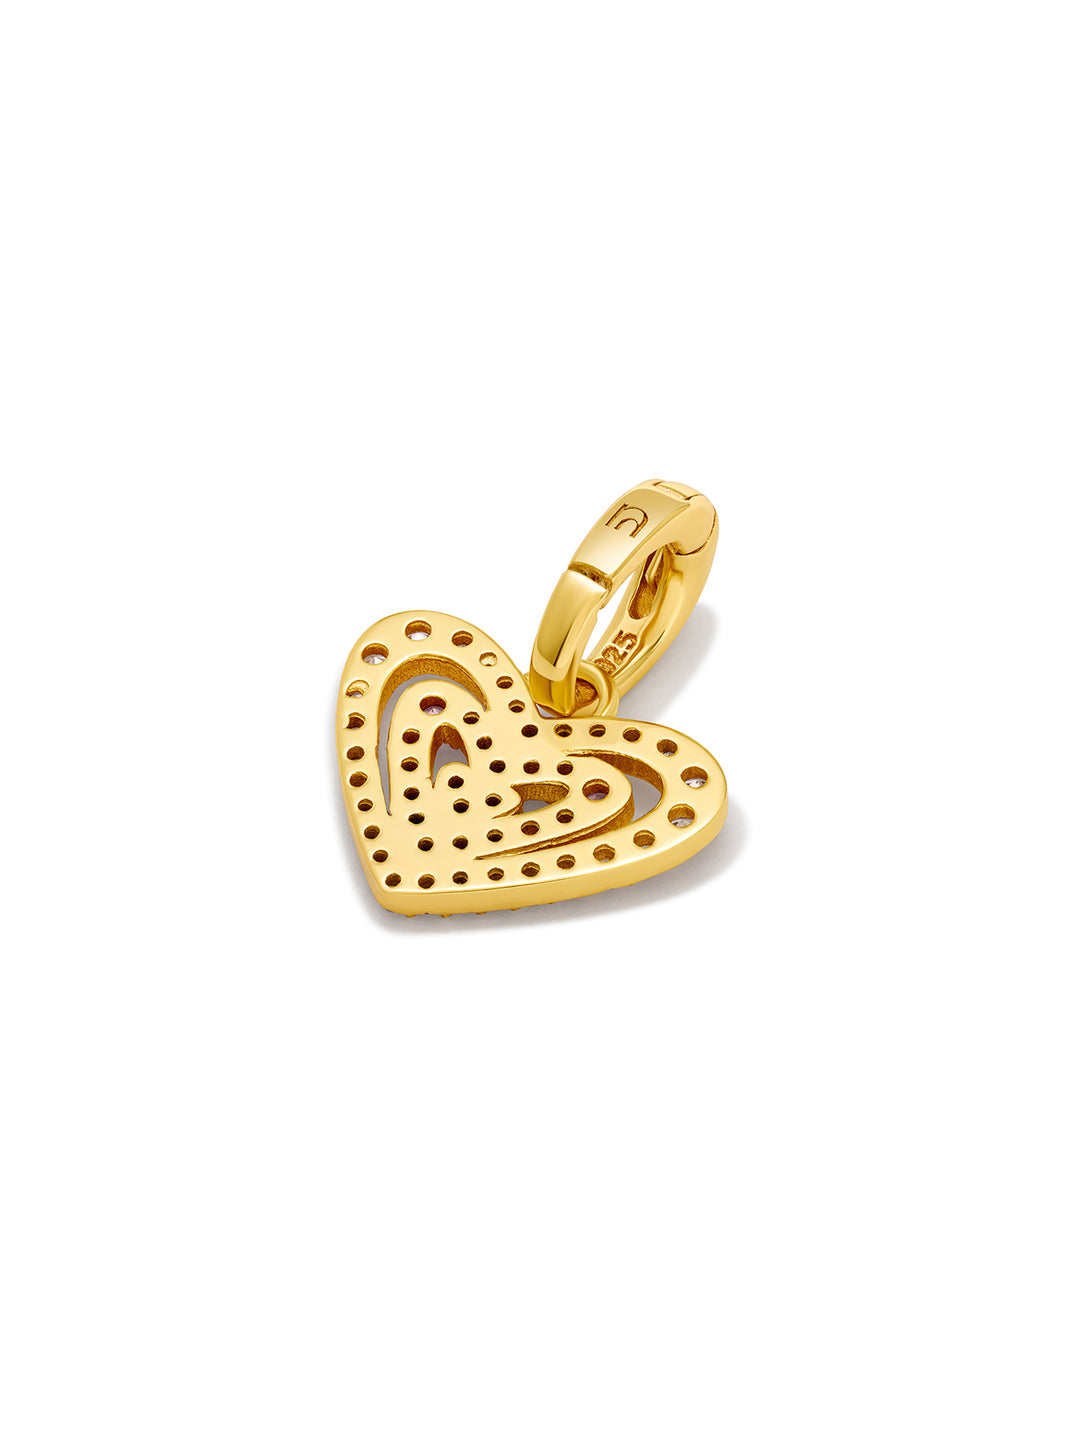 ROSE HEART - Charm • Color: 18K Yellow Gold